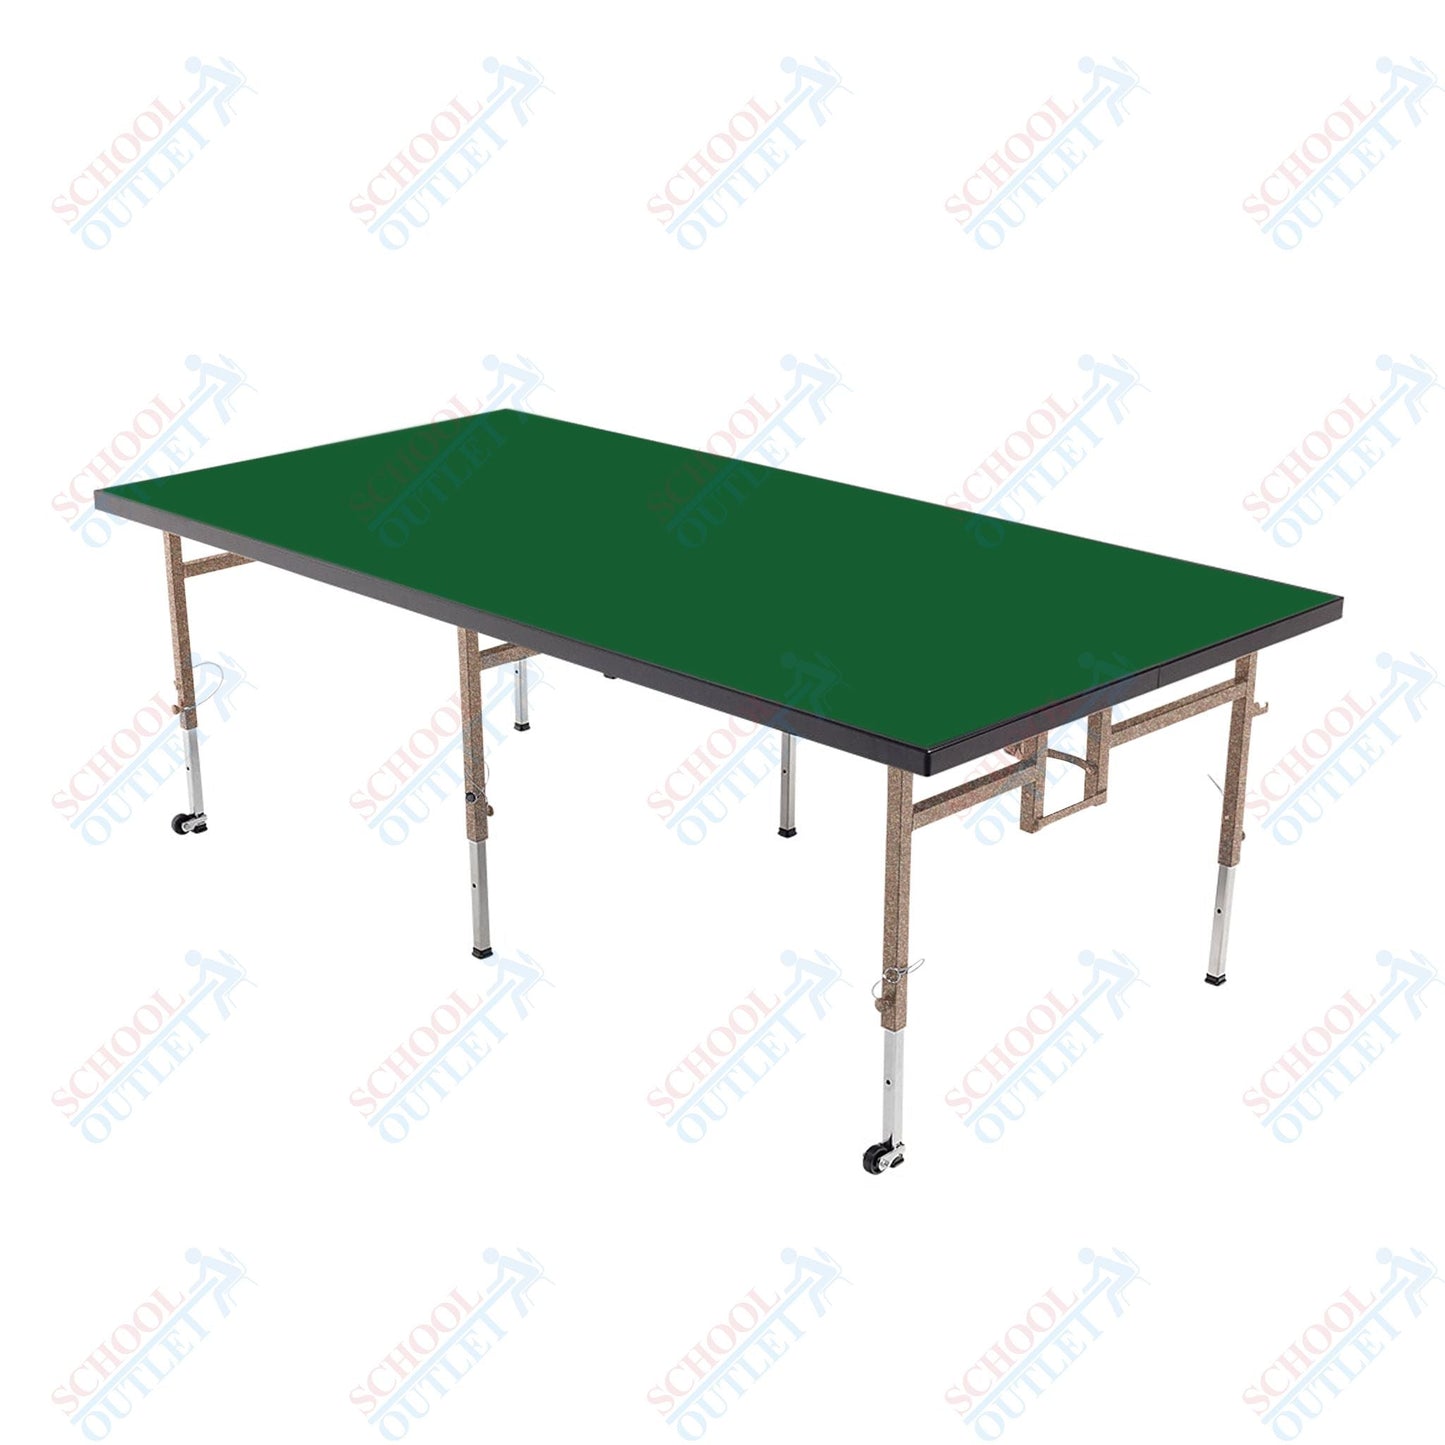 AmTab Adjustable Height Stage - Carpet Top - 36"W x 48"L x Adjustable 24" to 32"H (AmTab AMT-STA3424C) - SchoolOutlet